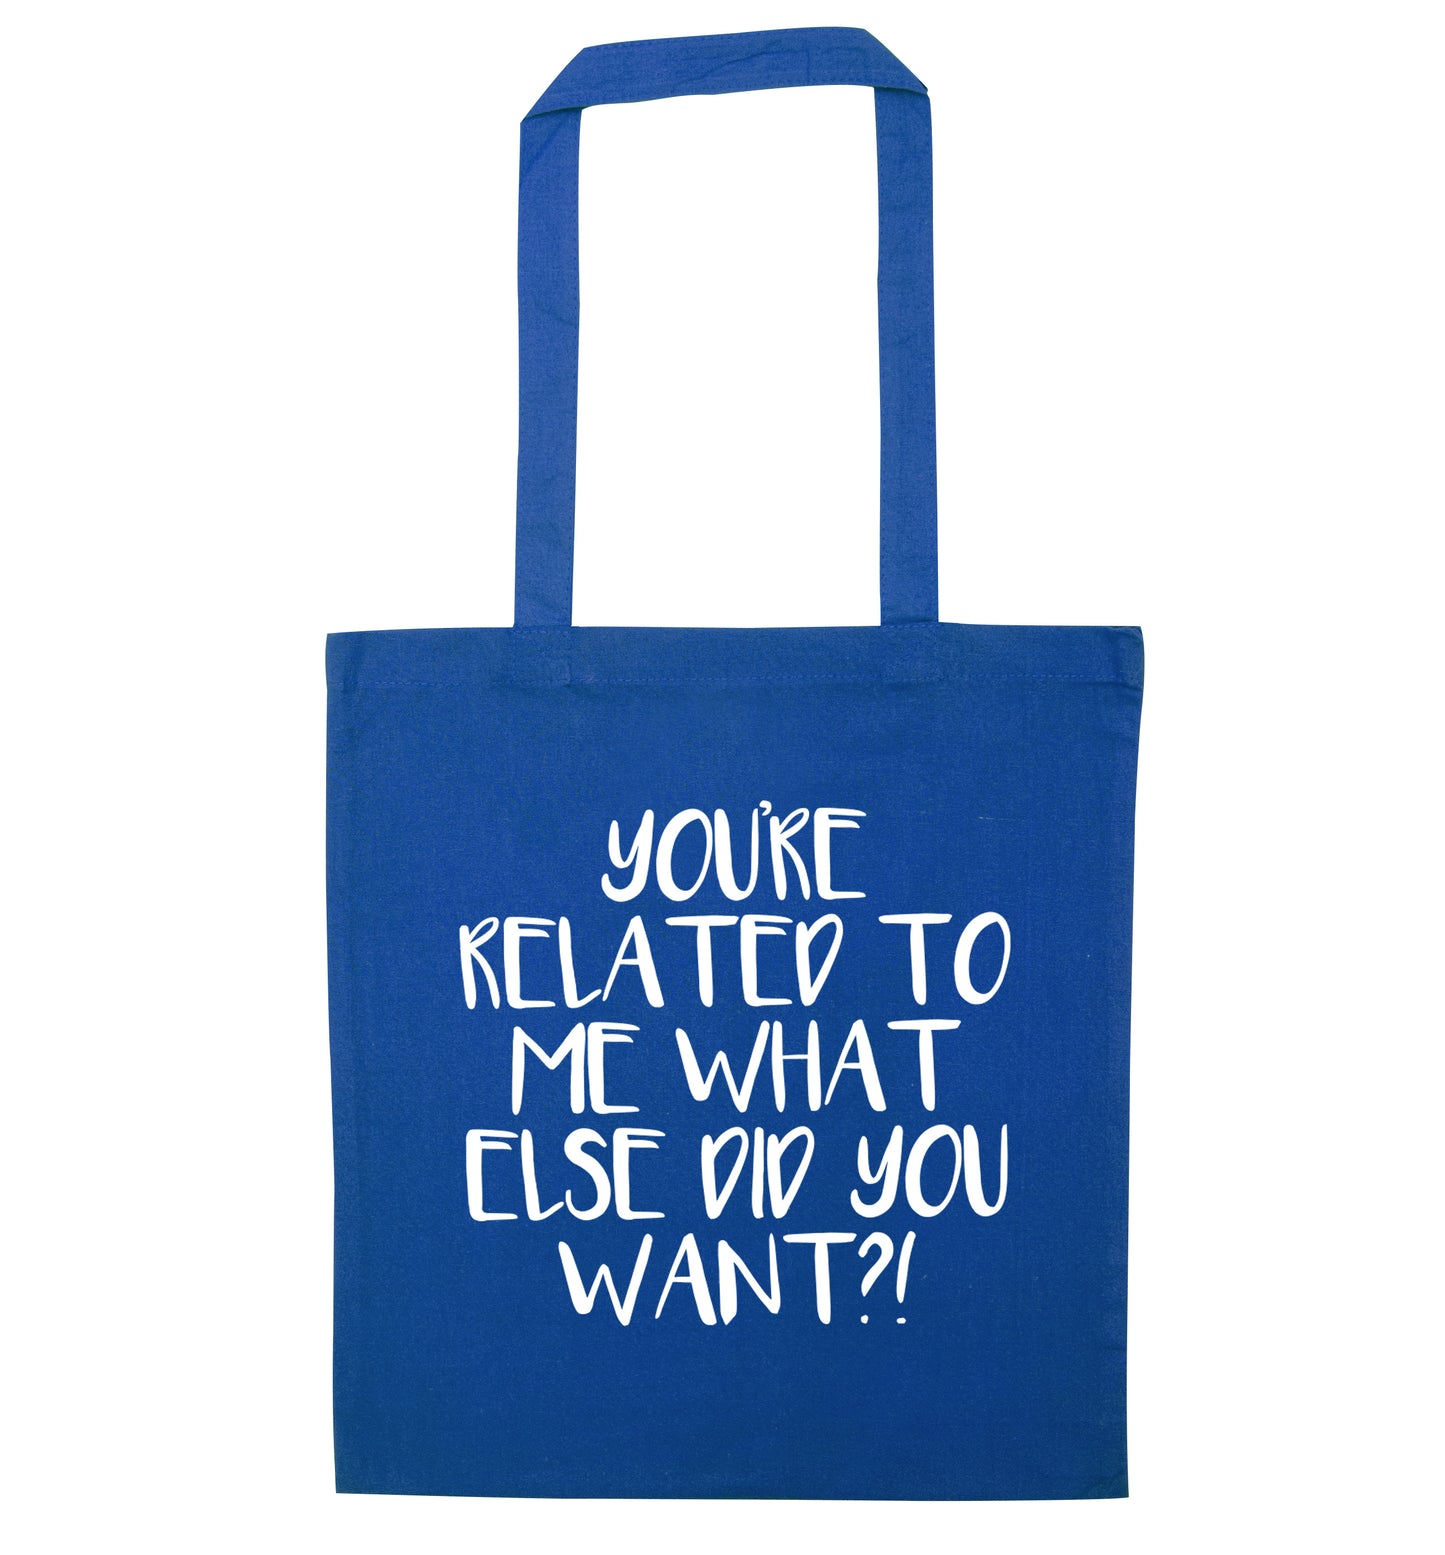 You're related to me what more do you want? blue tote bag